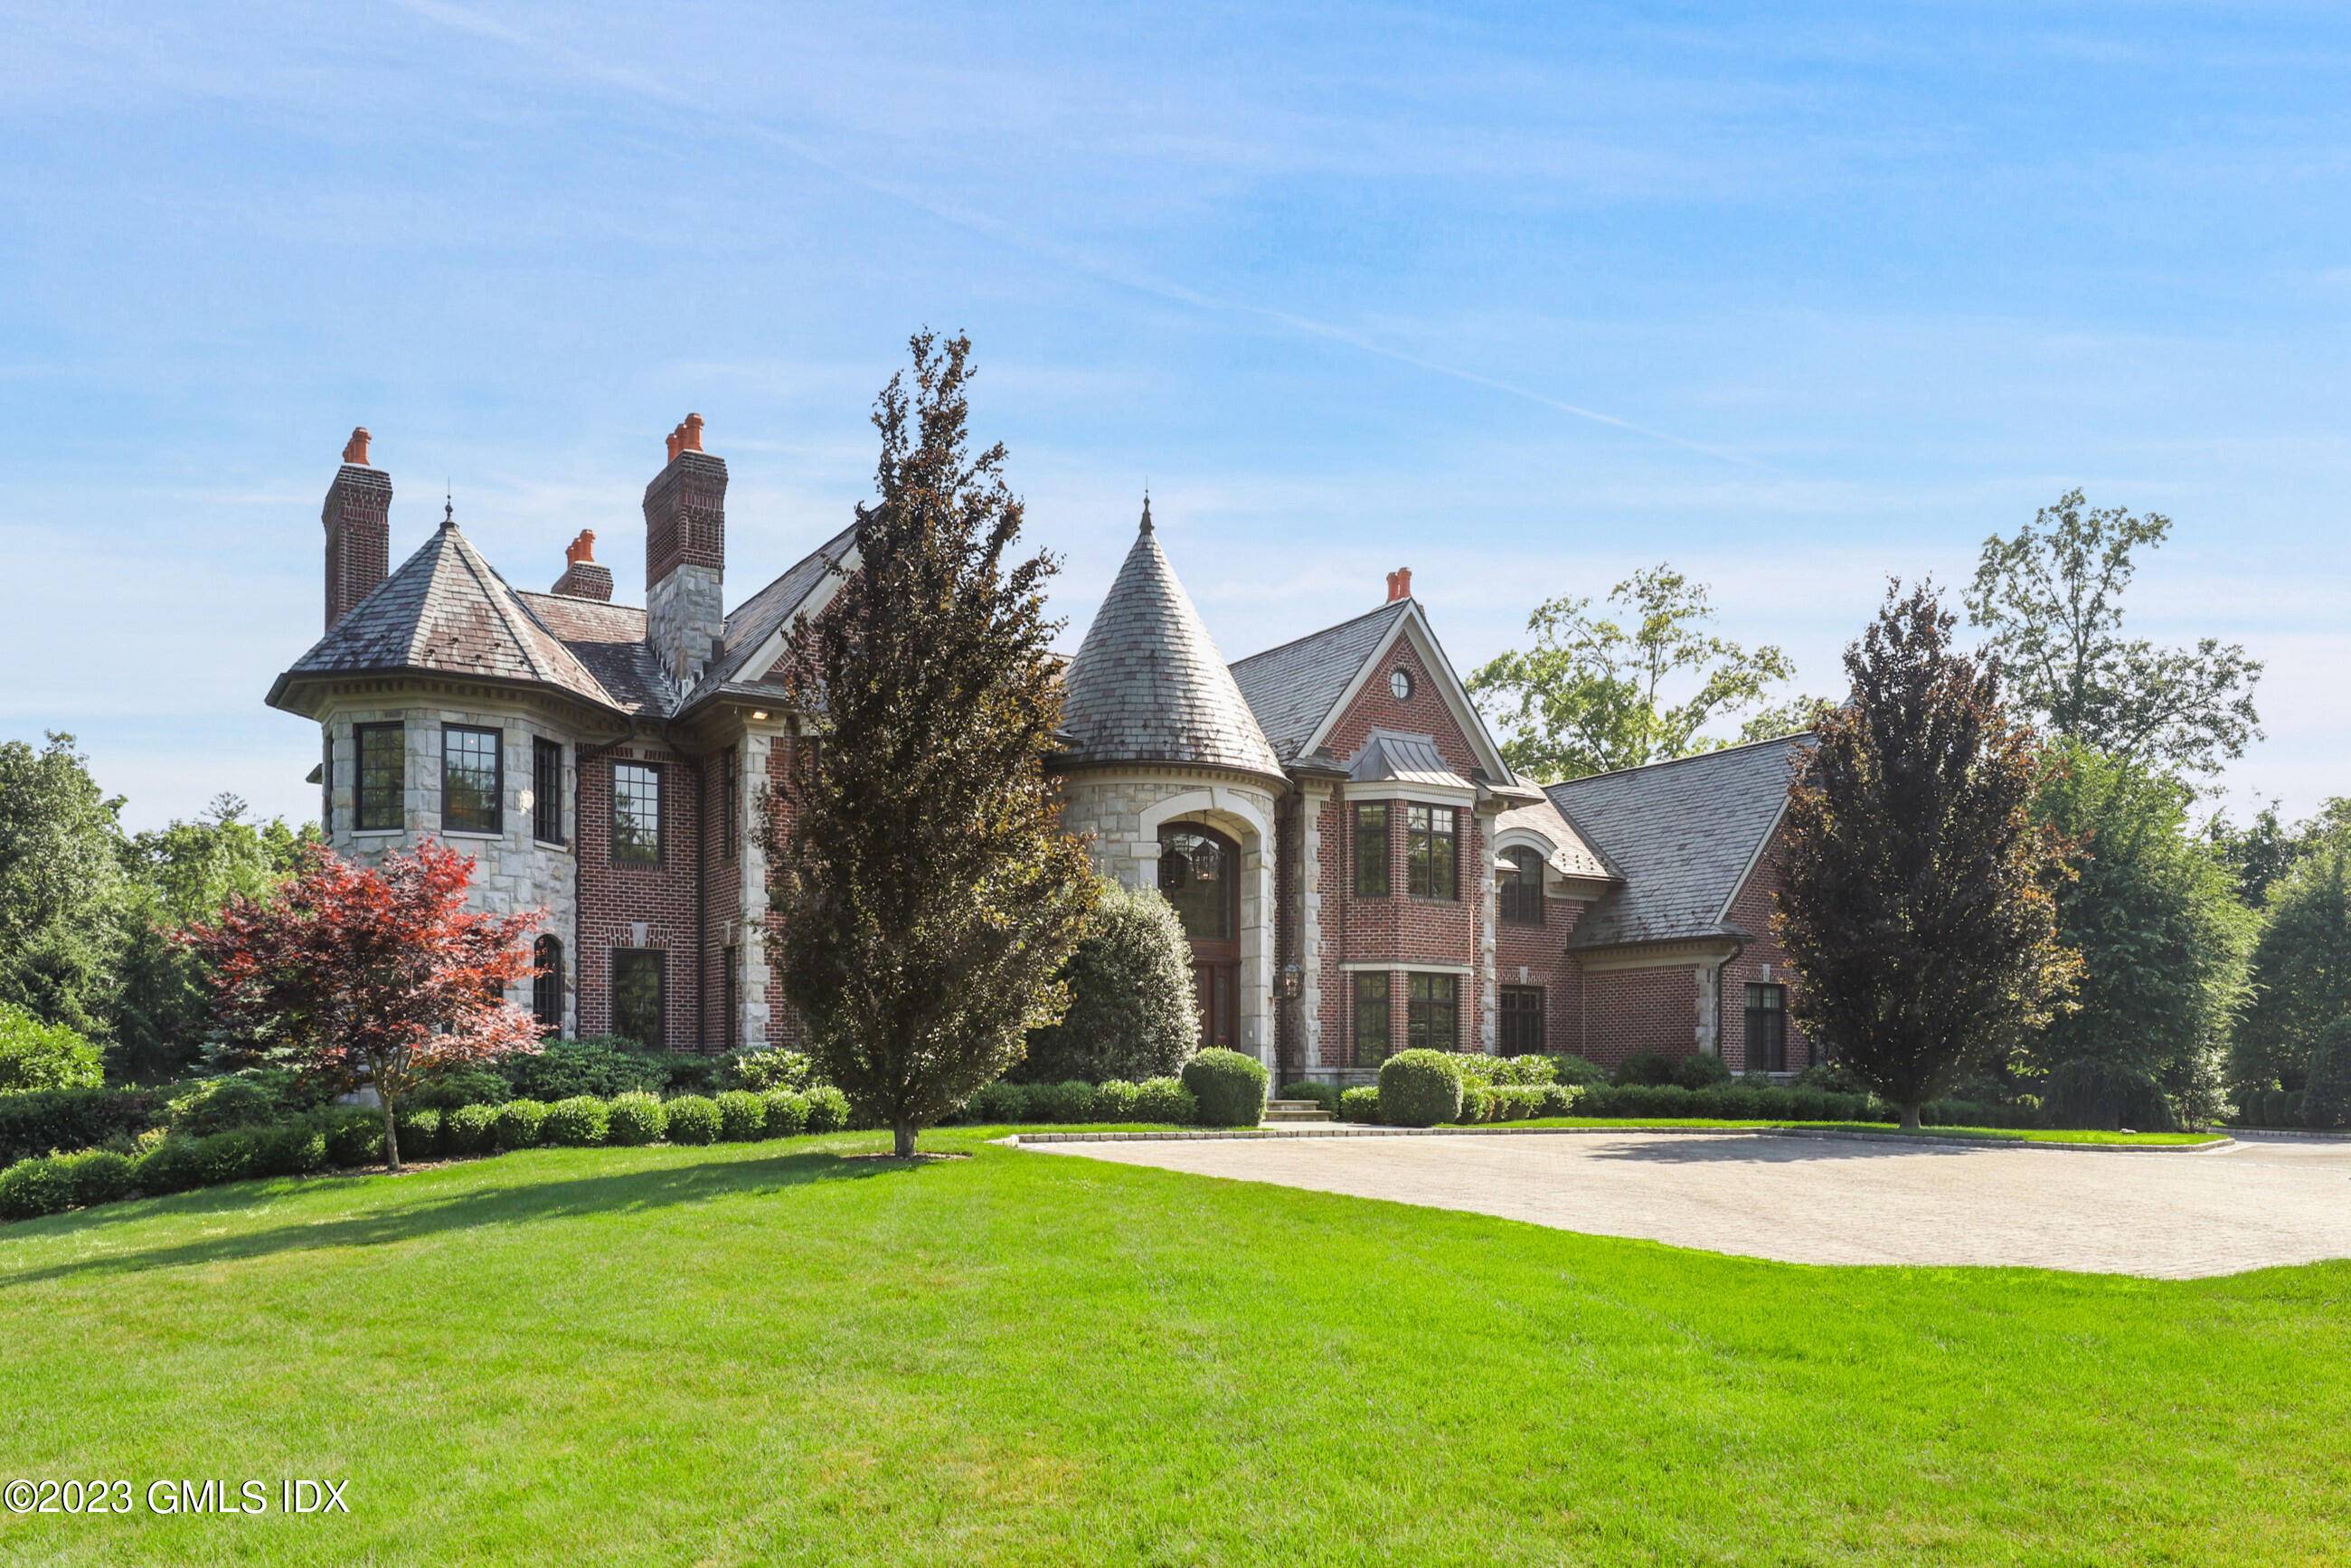 Custom built stone and brick manor with old world charm and character.